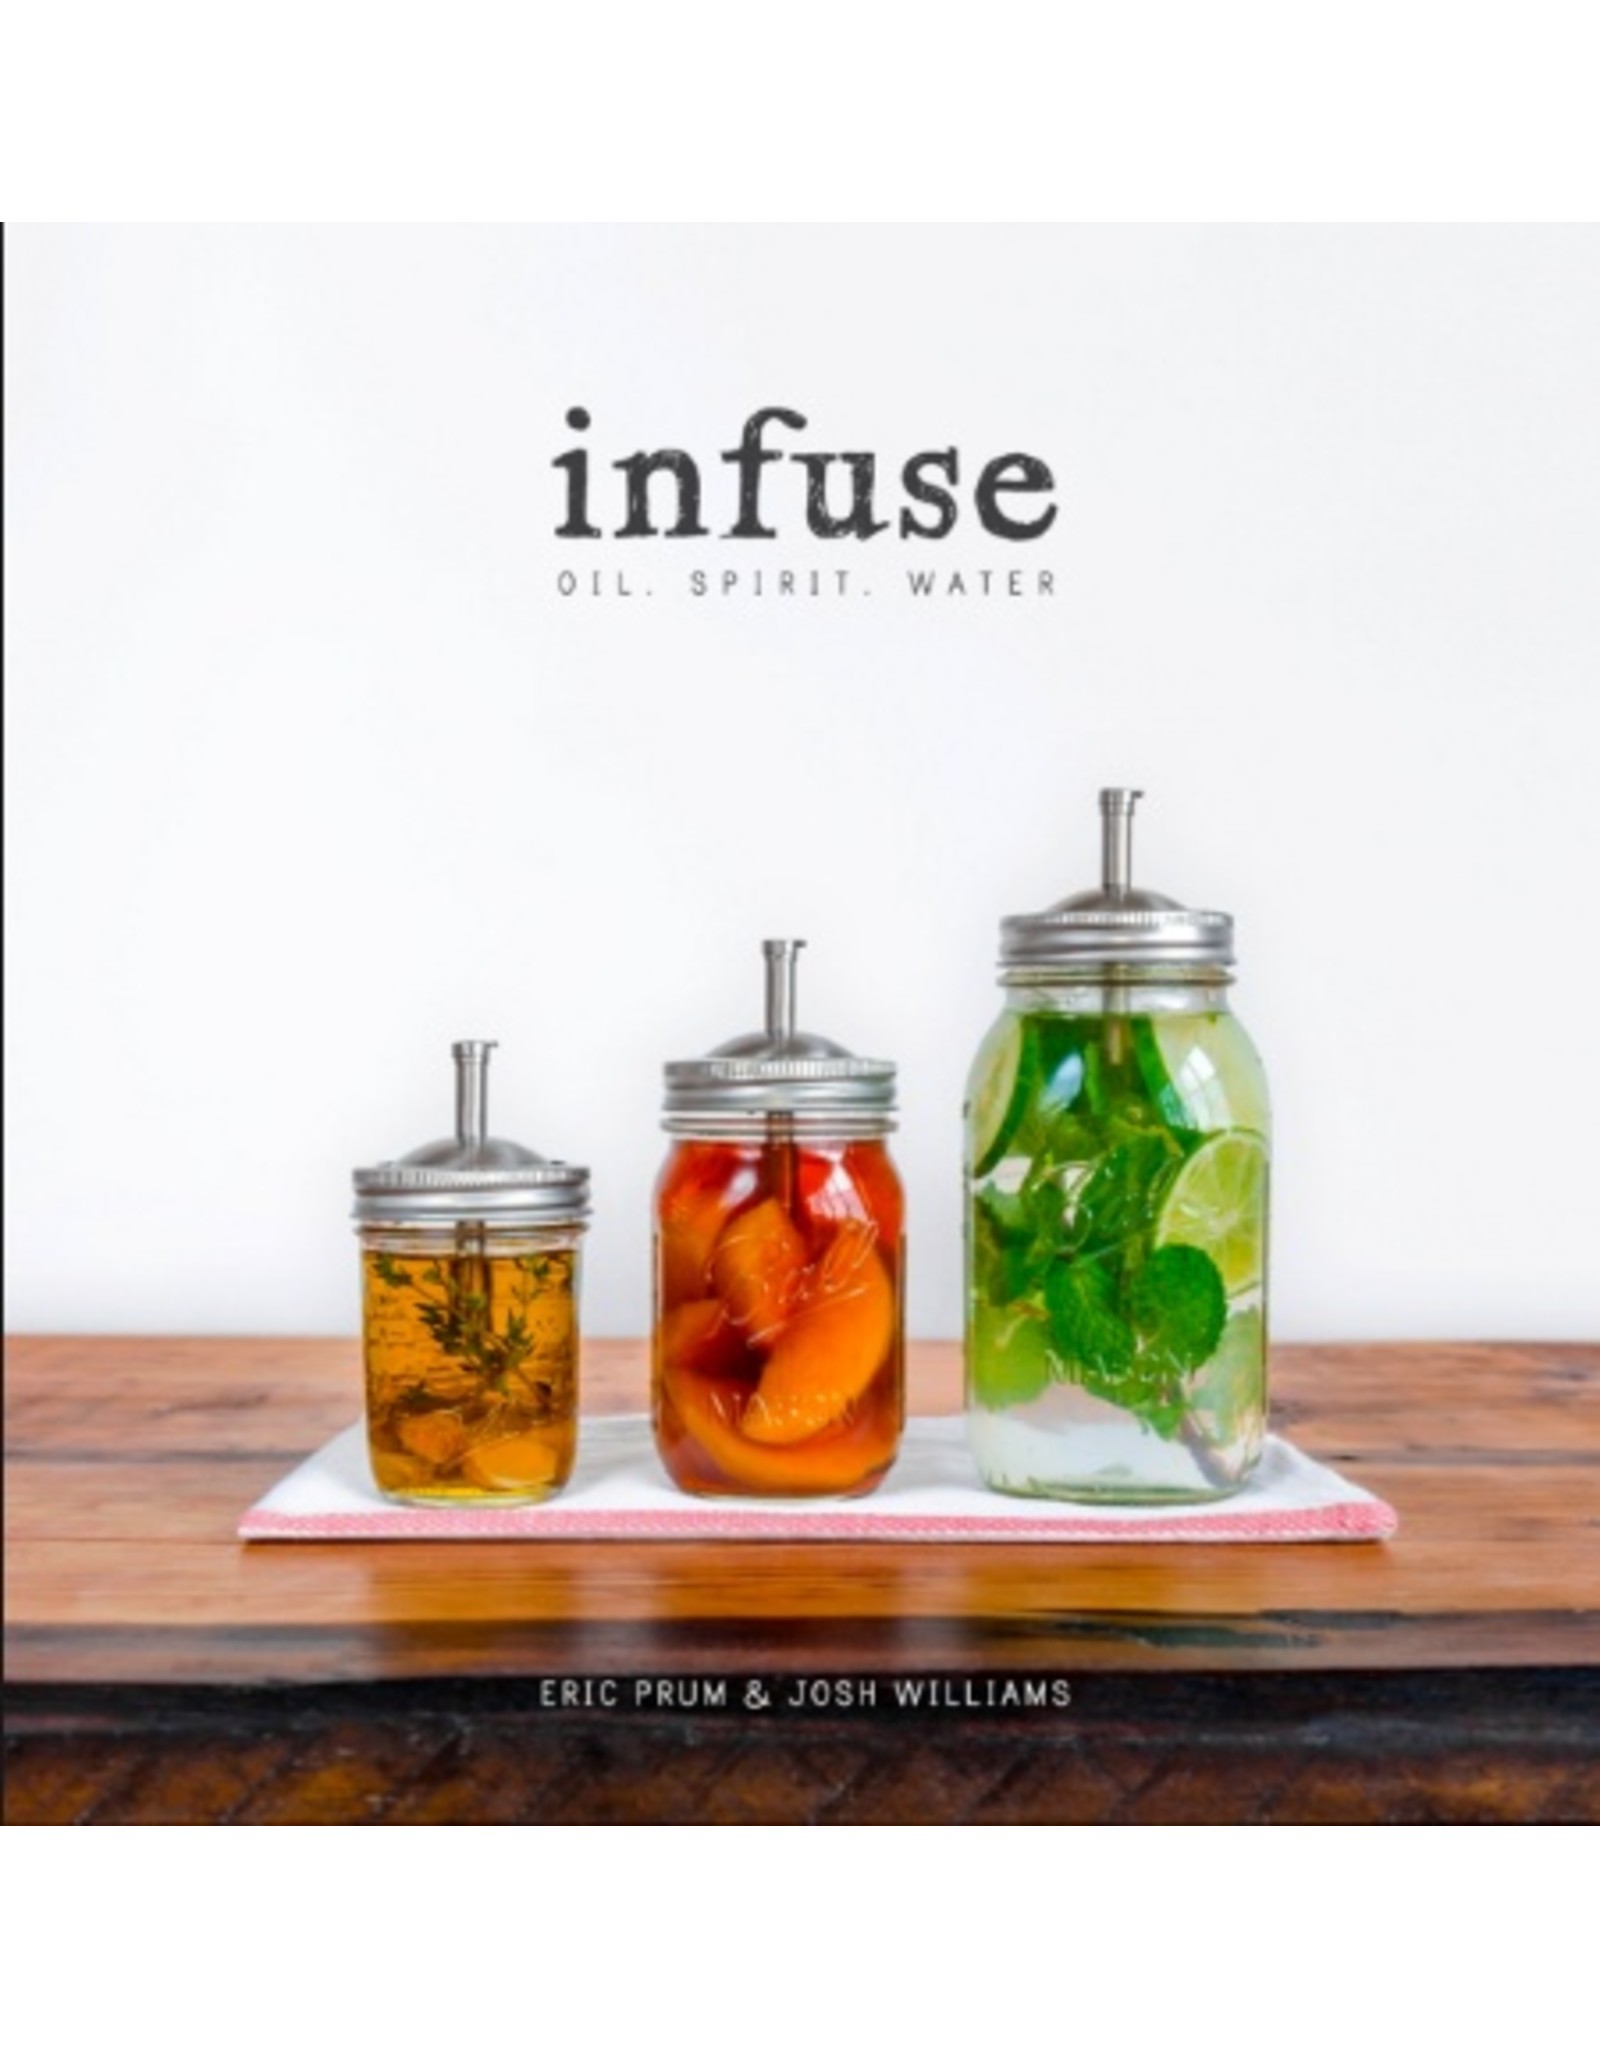 Infuse: Oil. Spirit. Water